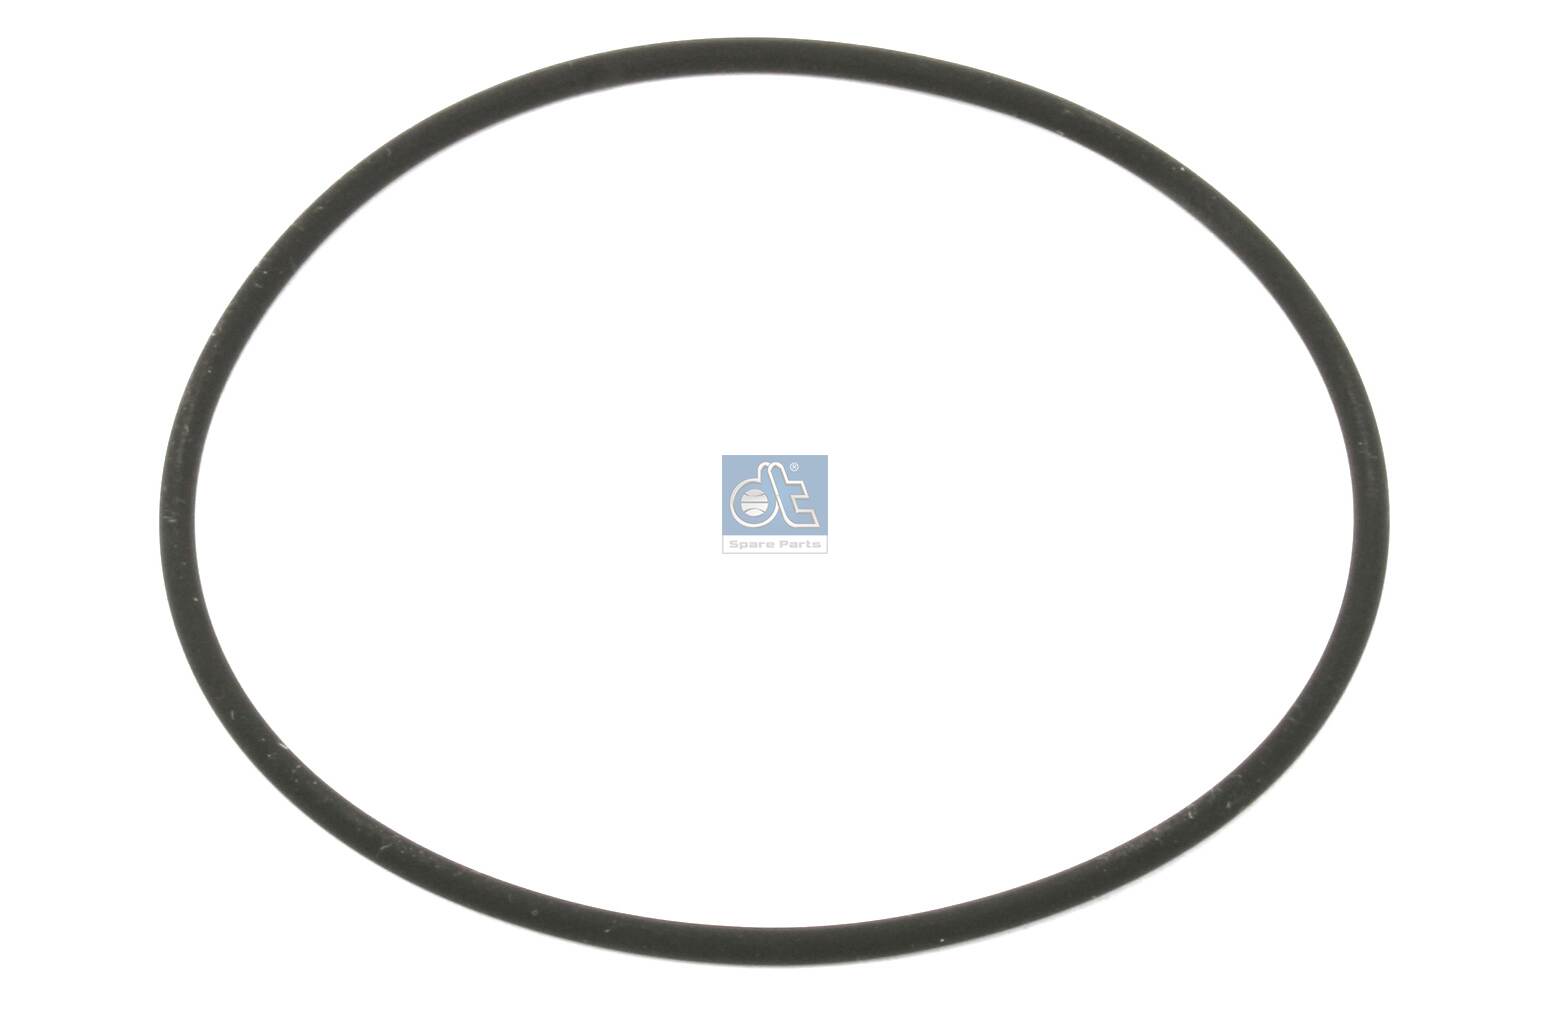 2.15900, Gasket, water pump, DT Spare Parts, 7400948980, 948980, 102194, 115.977, 124675, 2081, 40-10133-00, 70-36491-00, 98204500, OR-980, O-RING90X3